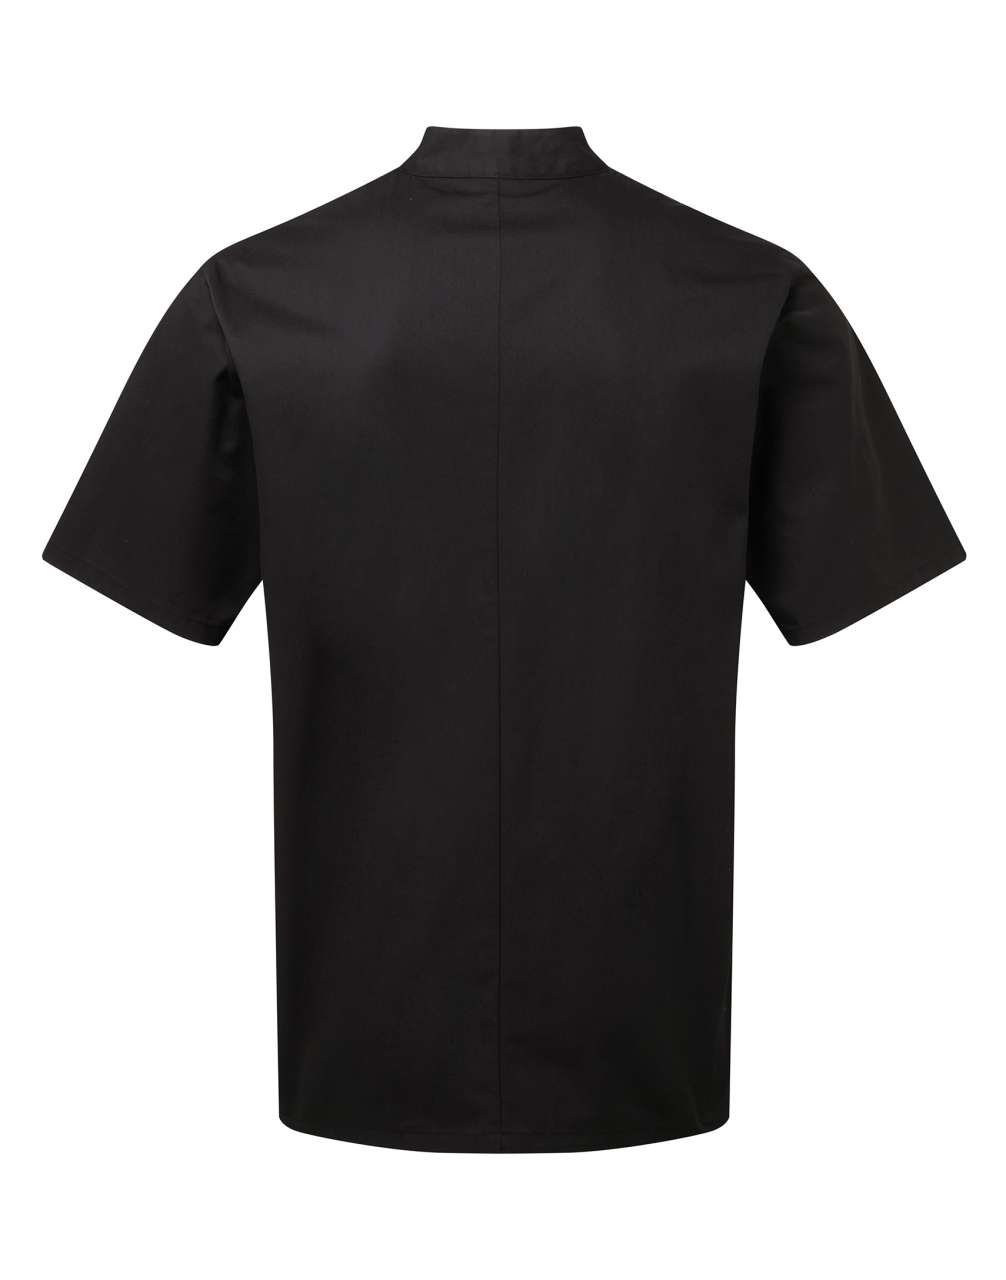 'ESSENTIAL' SHORT SLEEVE CHEF'S JACKET